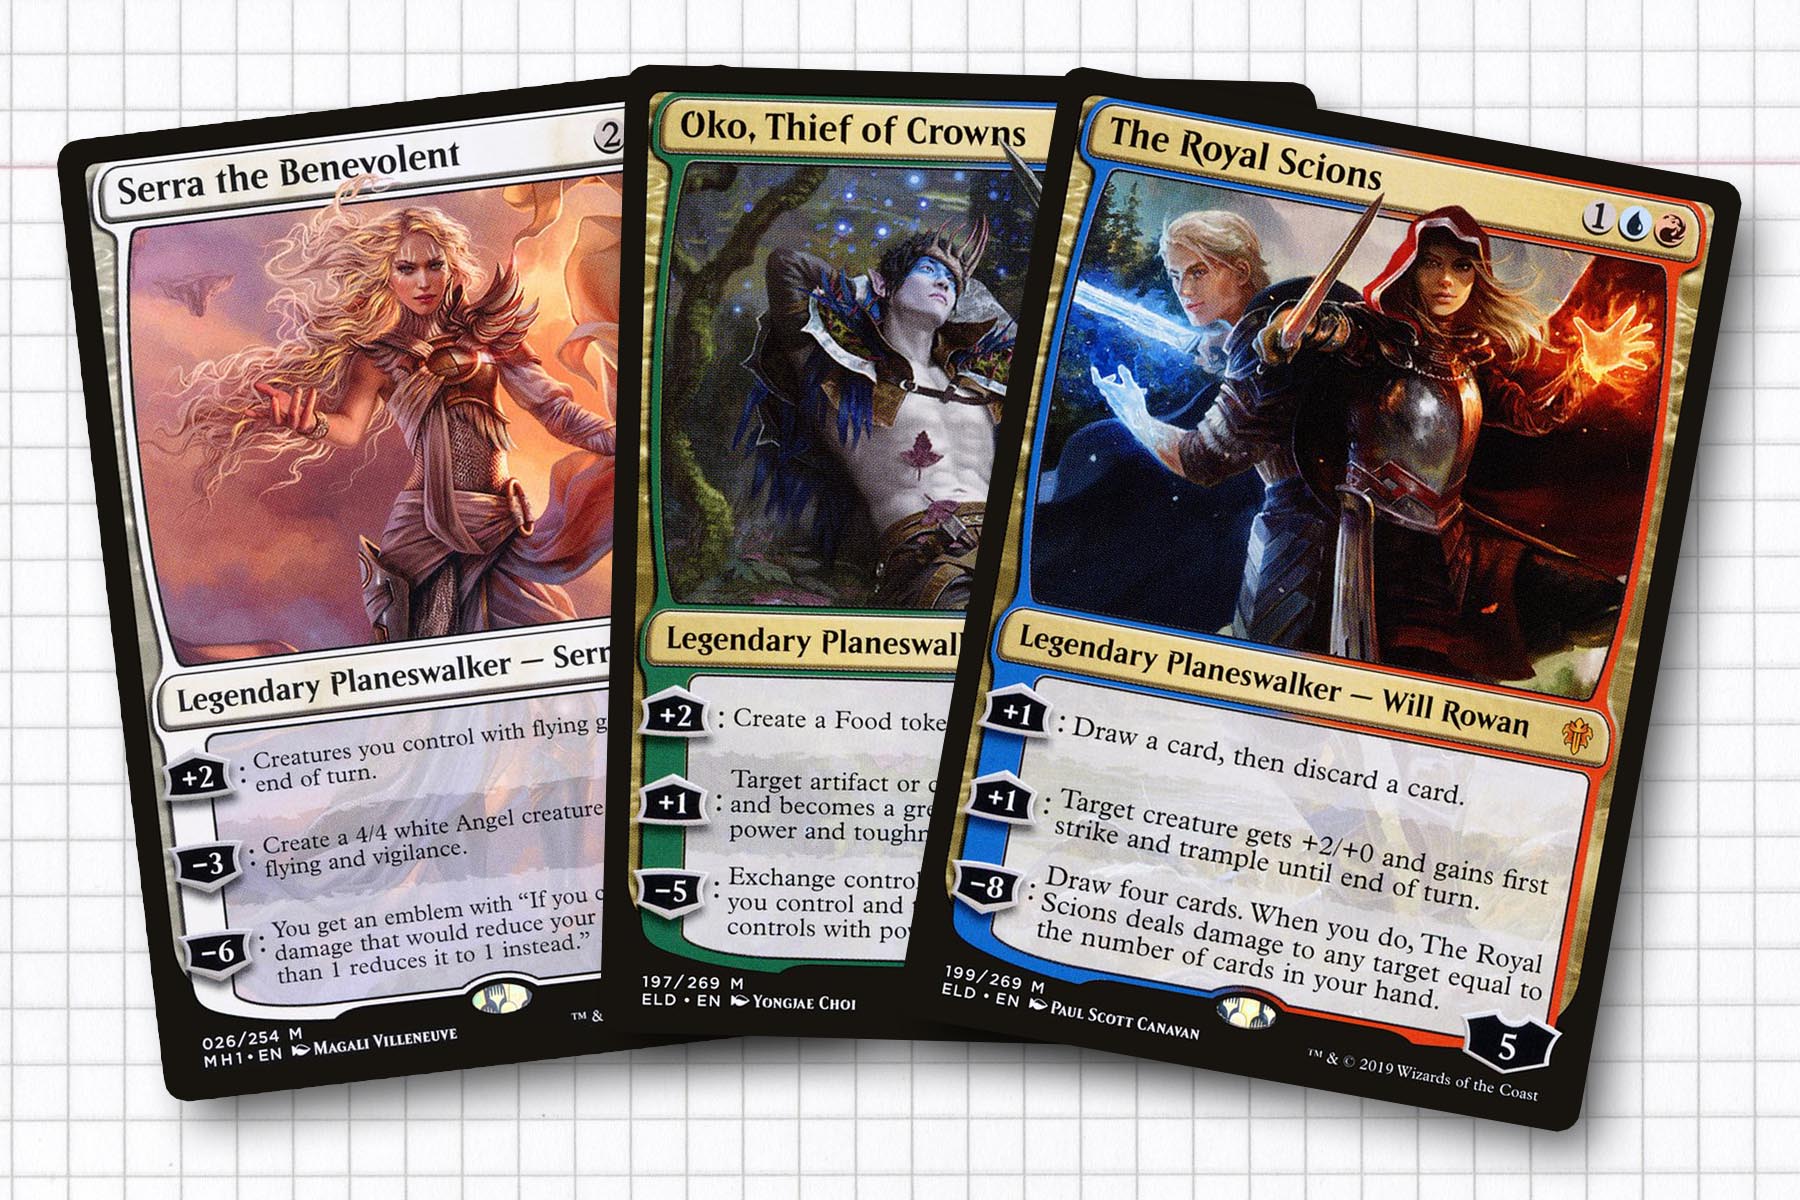 Serra the Benevolent, Oko, and The Royal Scions. Three planeswalkers of varying levels of notoriety.